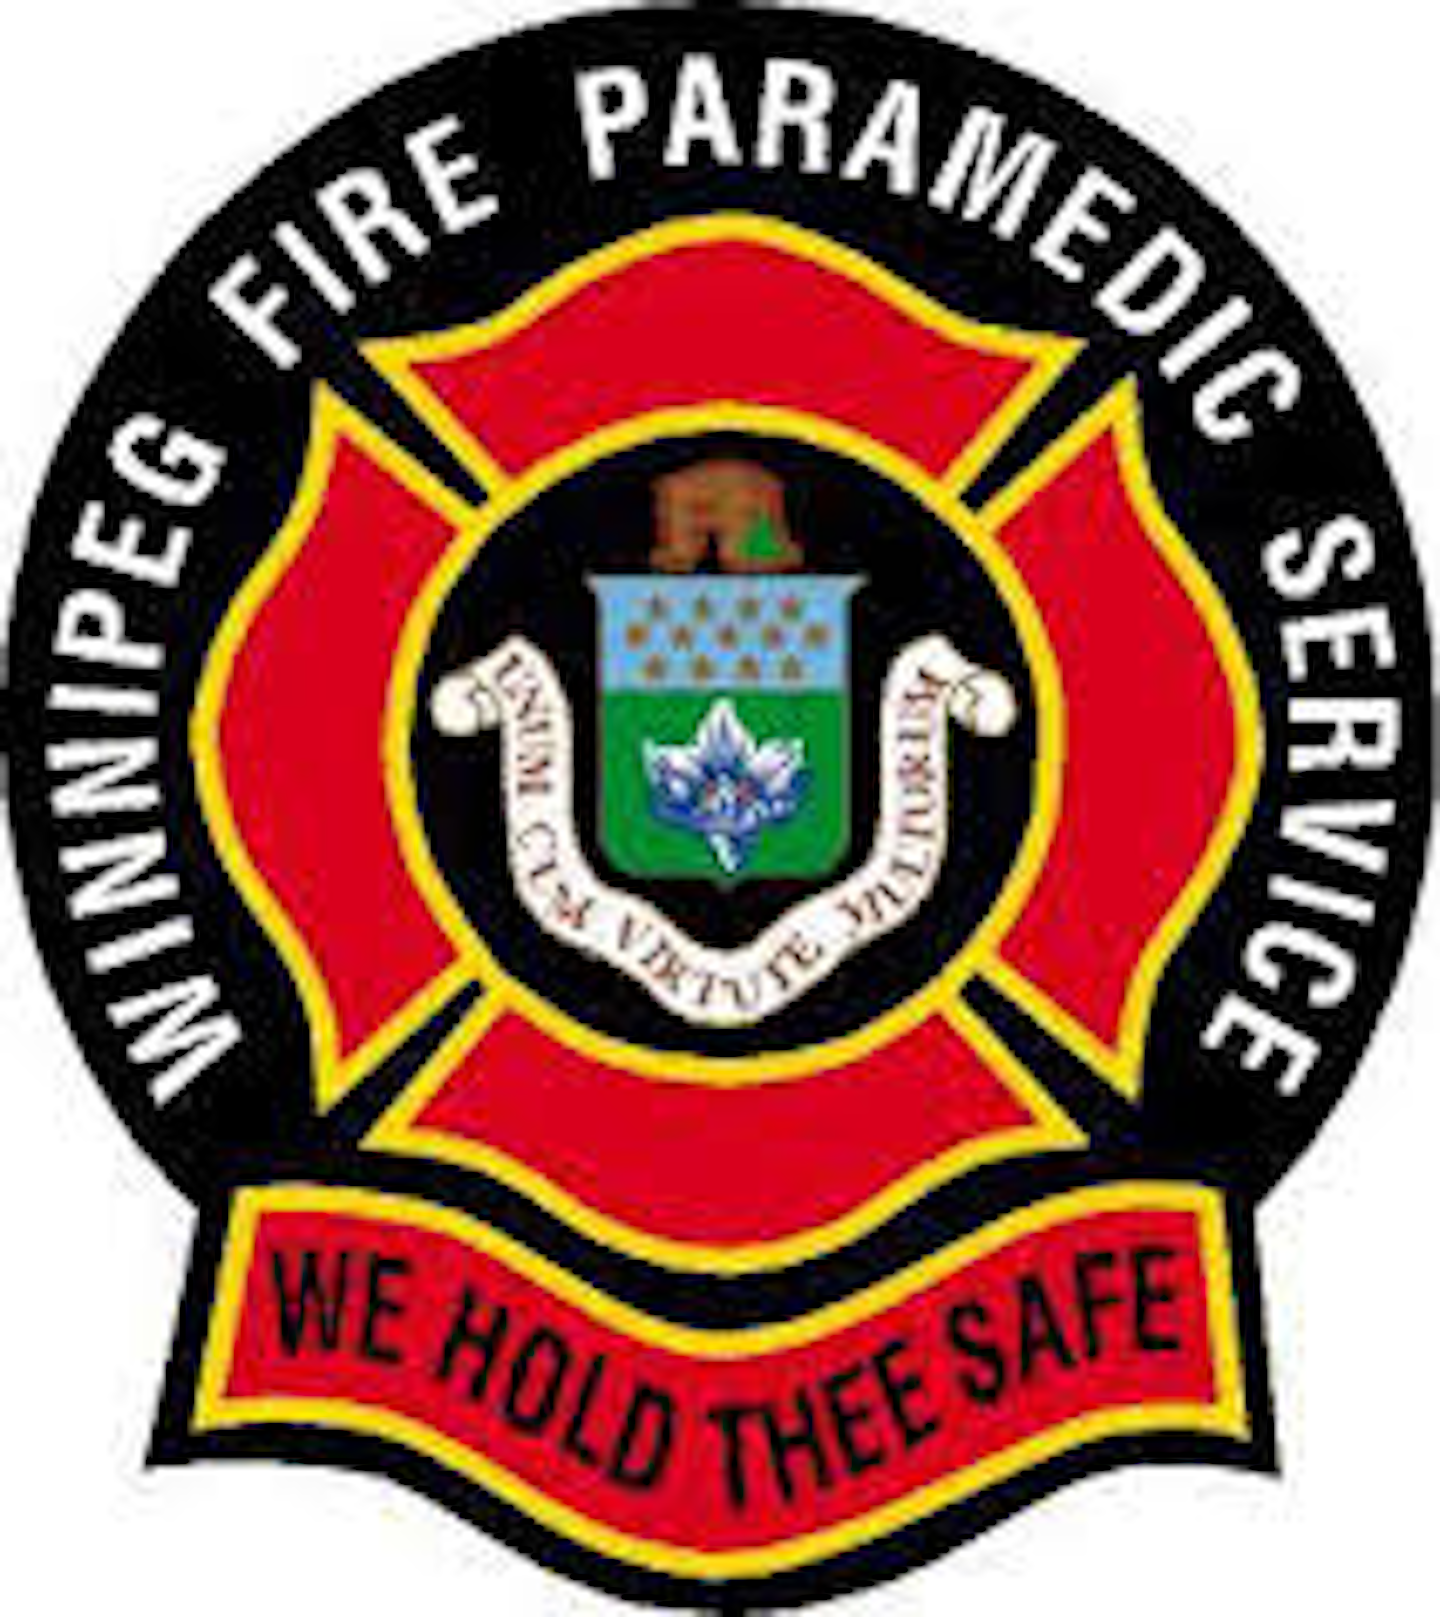 Canadian Firefighters Union Declines Extra Pay During Pandemic | Firehouse